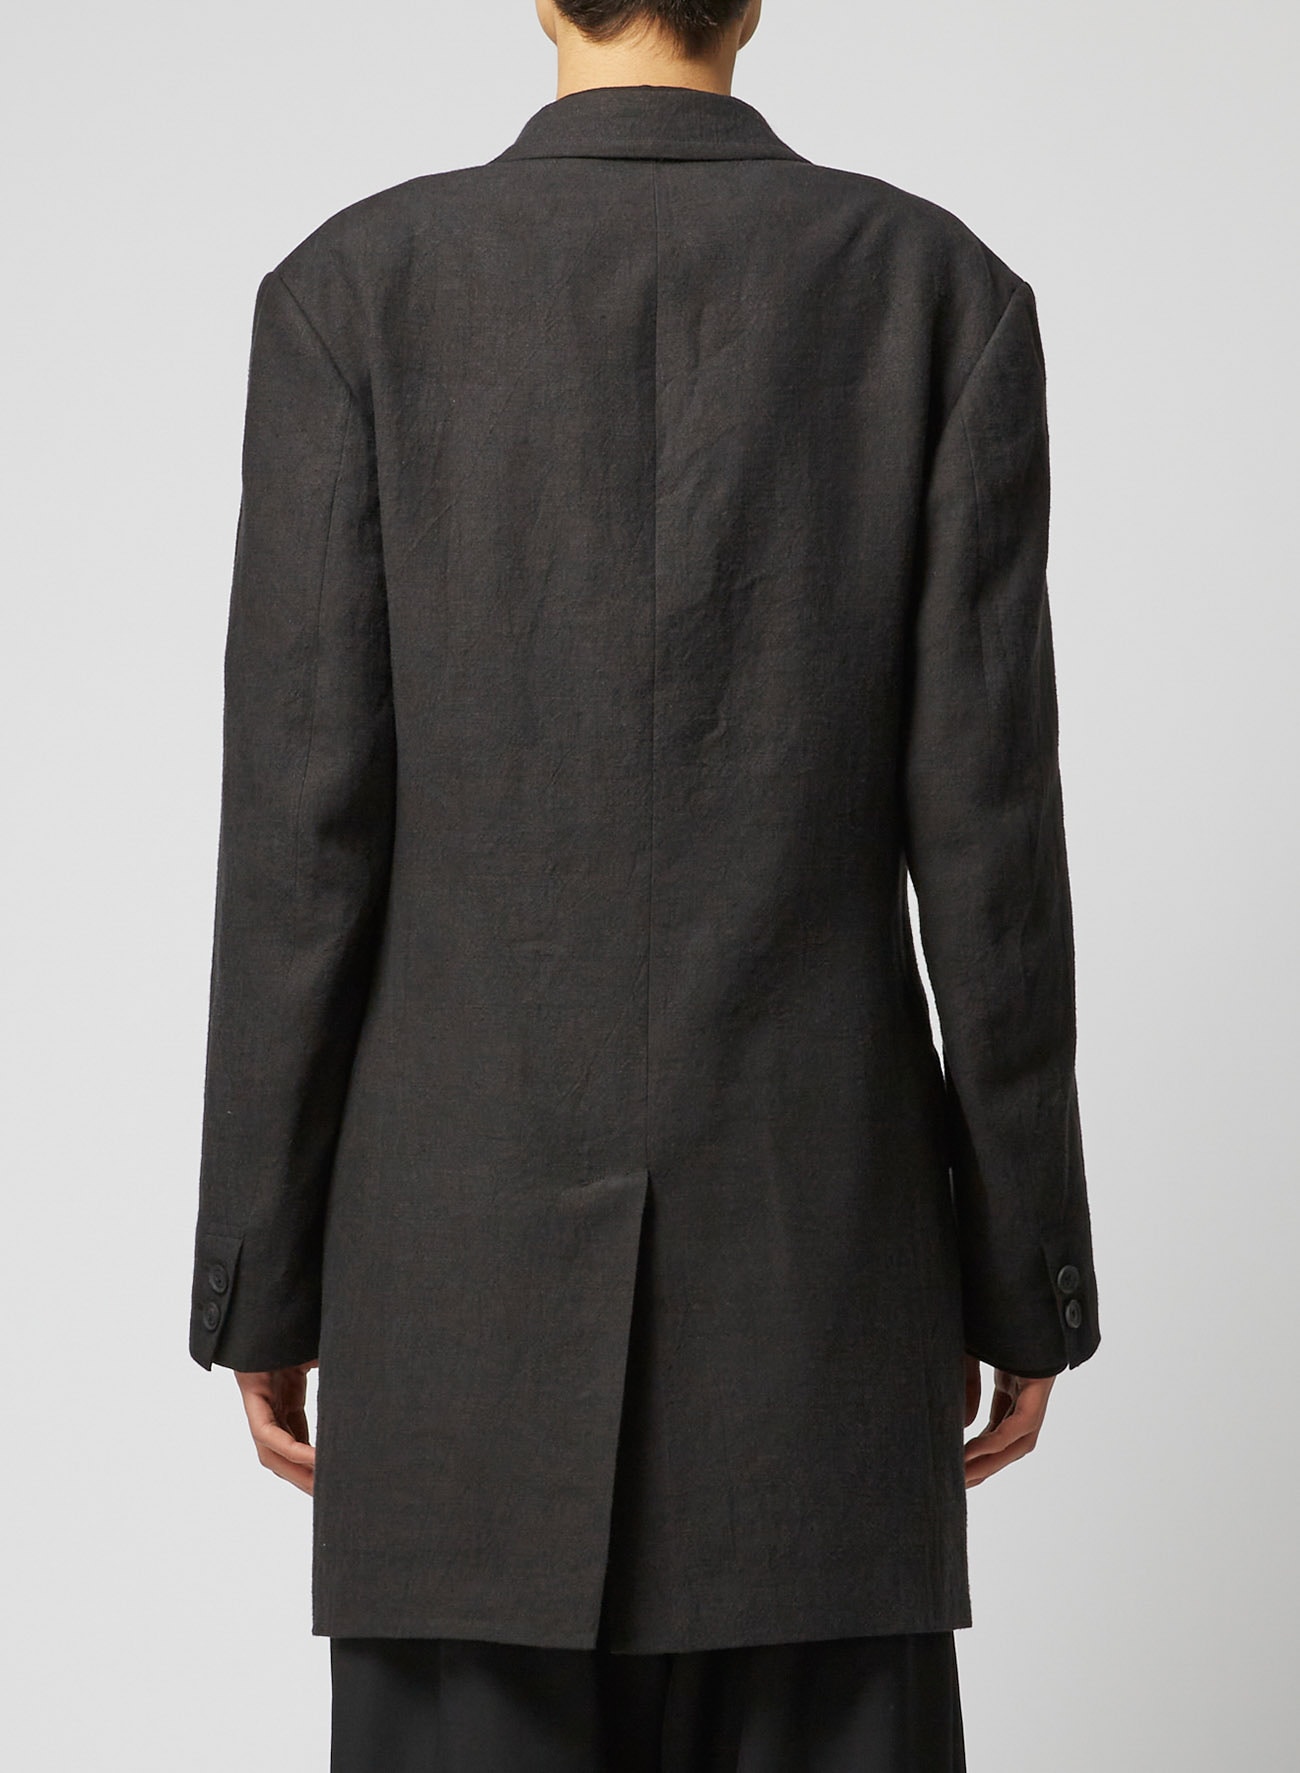 FLAX WOOL CLOTH SIDE BUTTON JACKET